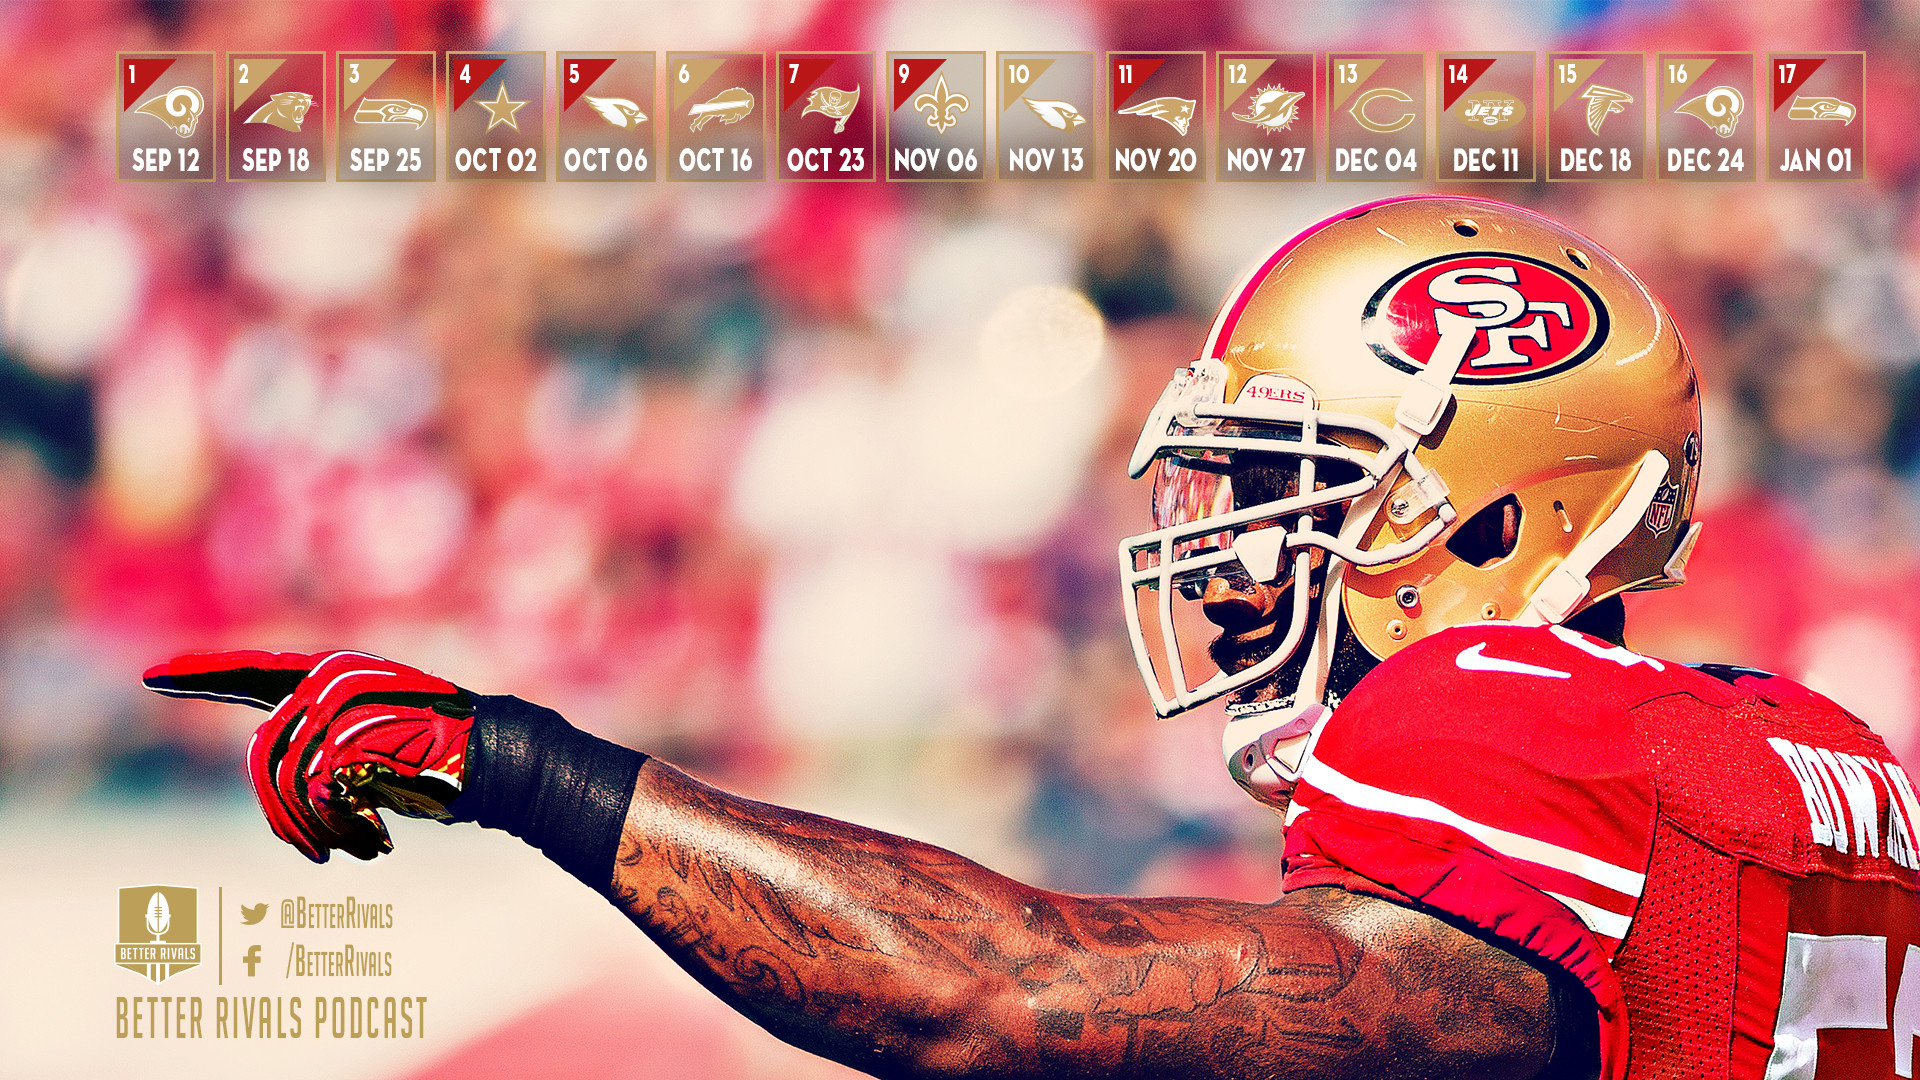 New 49ers Wallpapers for Desktop and Mobile